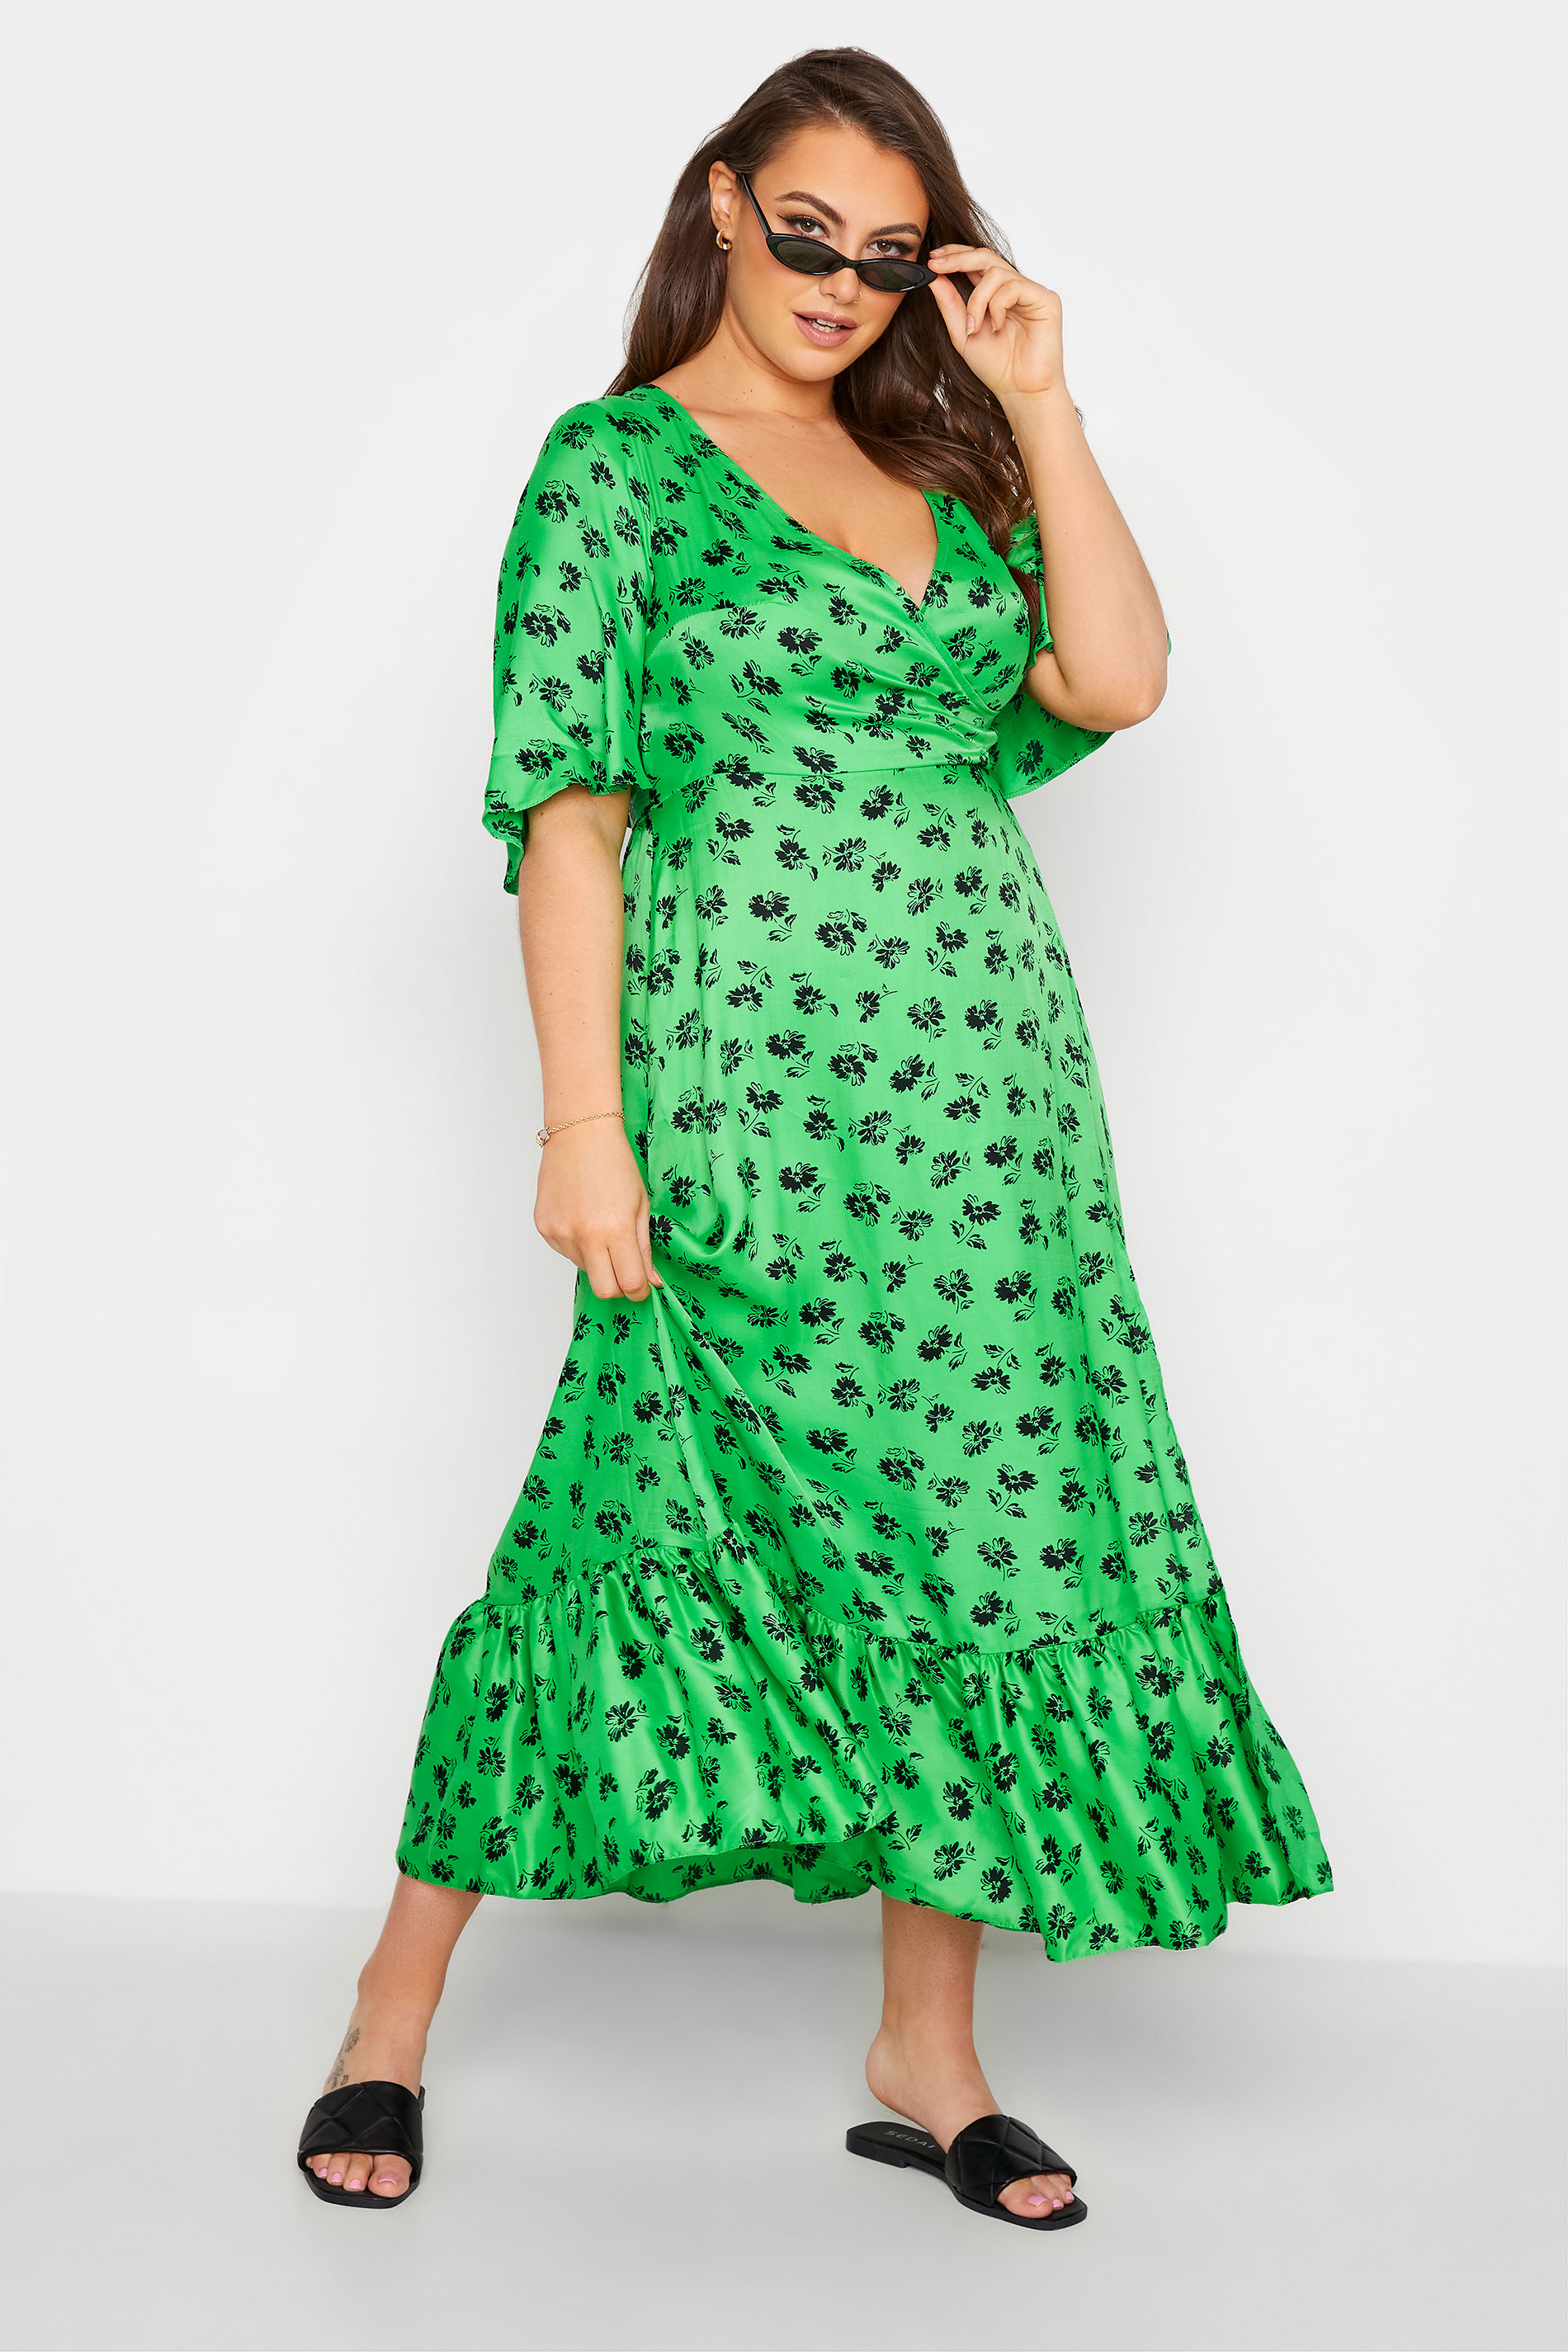 Robes Grande Taille Grande taille  Robes Longues | LIMITED COLLECTION - Robe Verte Floral Cache-Coeur - XG24373